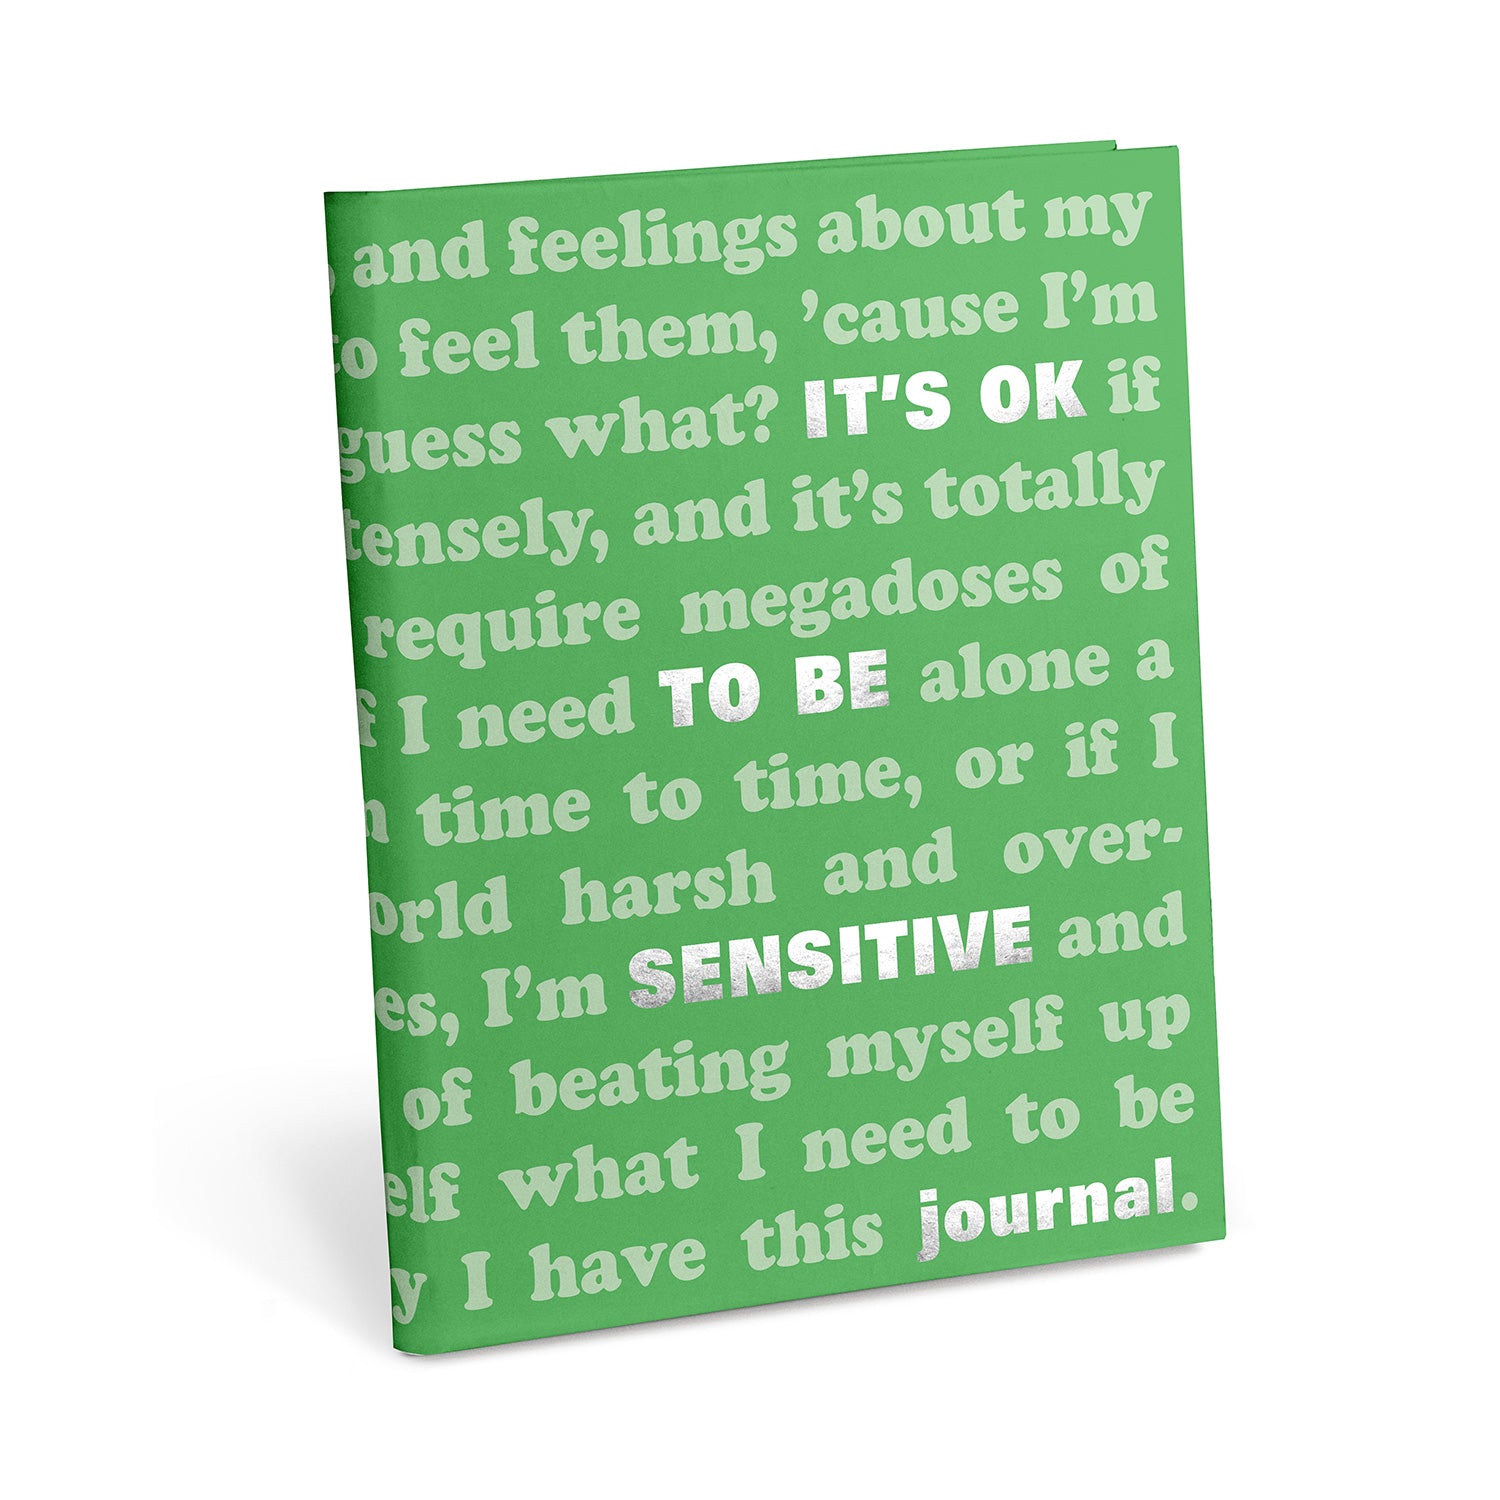 It's OK To Be Sensitive Journal